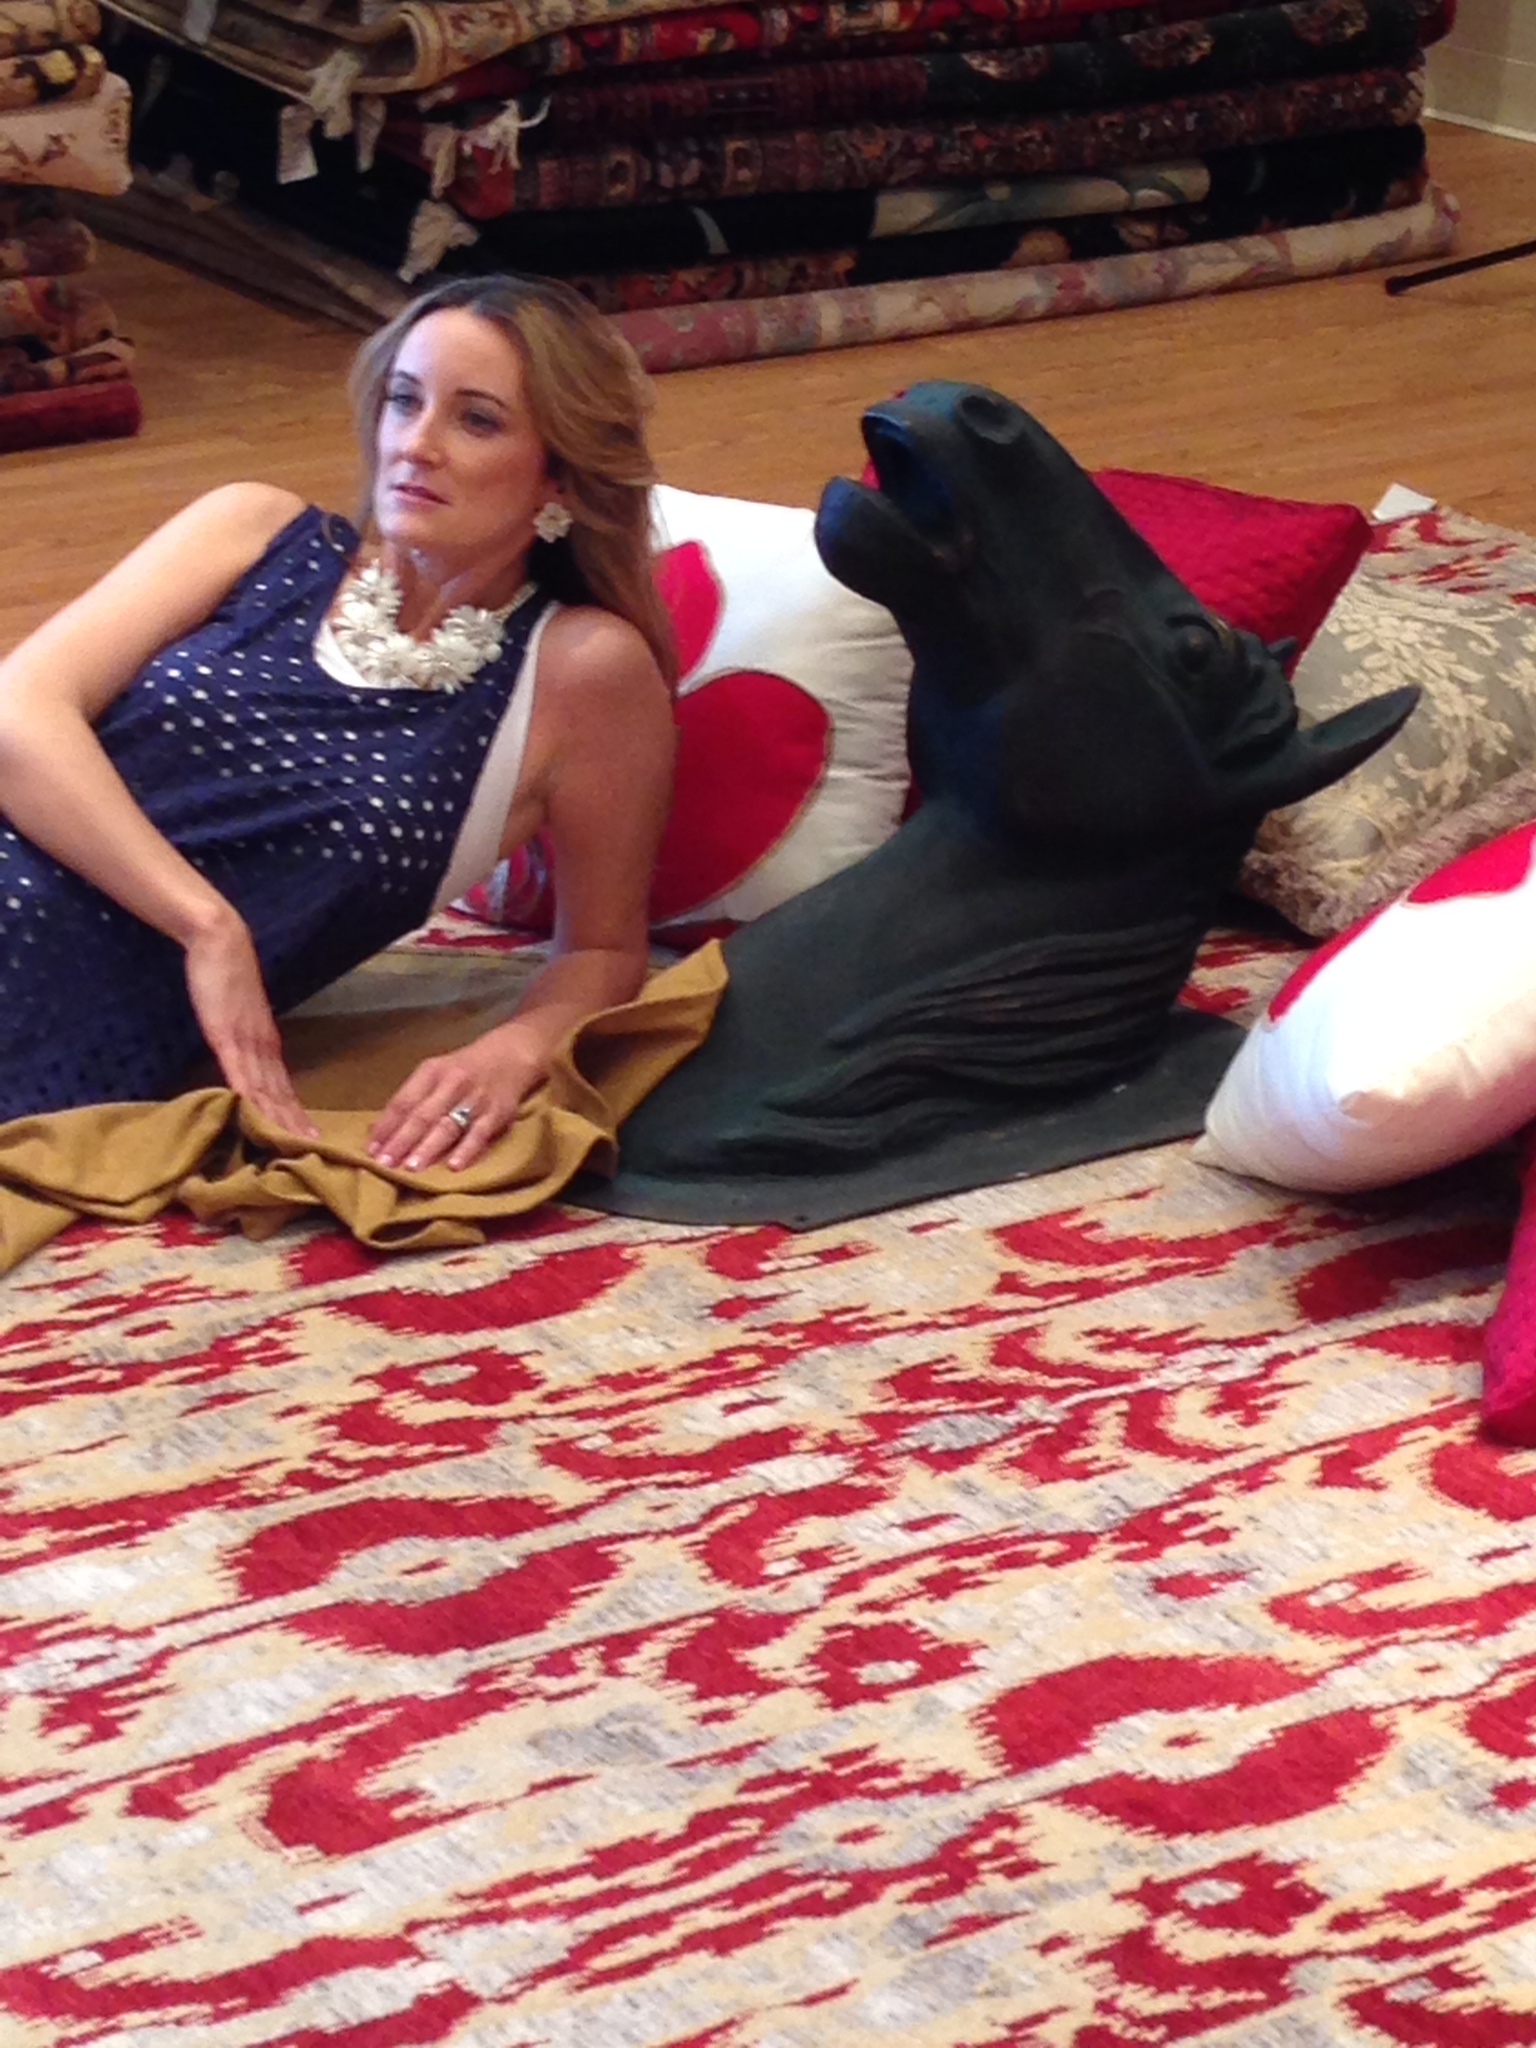 A horse head, a rug and me. A love story.